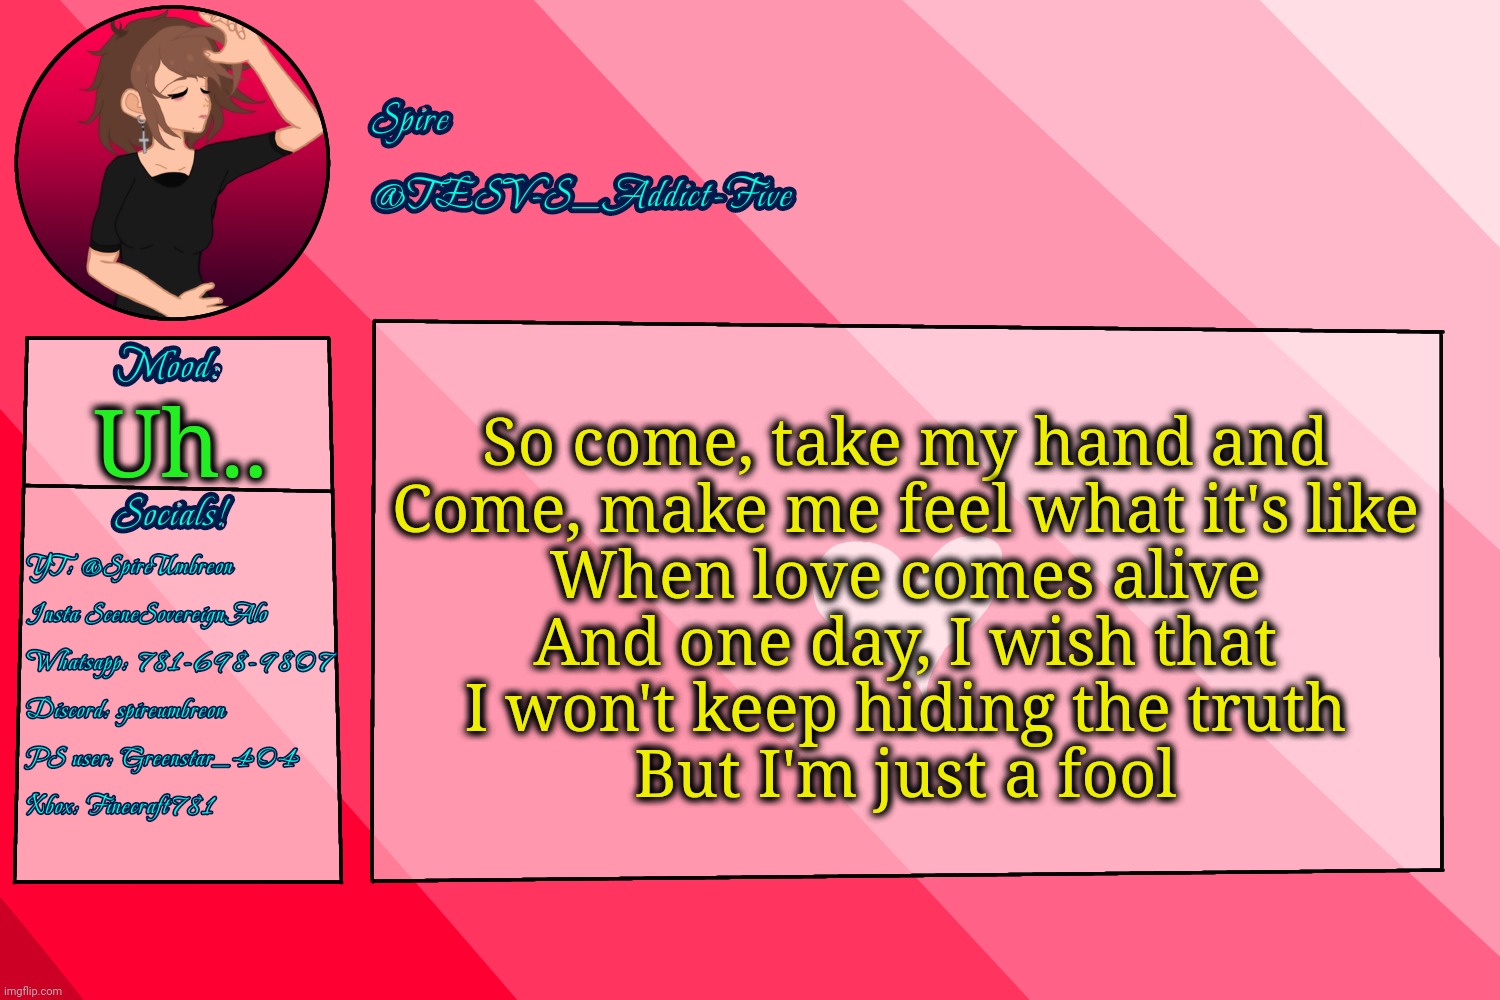 This song goes crazy sometimes | So come, take my hand and
Come, make me feel what it's like
When love comes alive
And one day, I wish that
I won't keep hiding the truth
But I'm just a fool; Uh.. | image tagged in tesv-s_addict-five announcement template | made w/ Imgflip meme maker